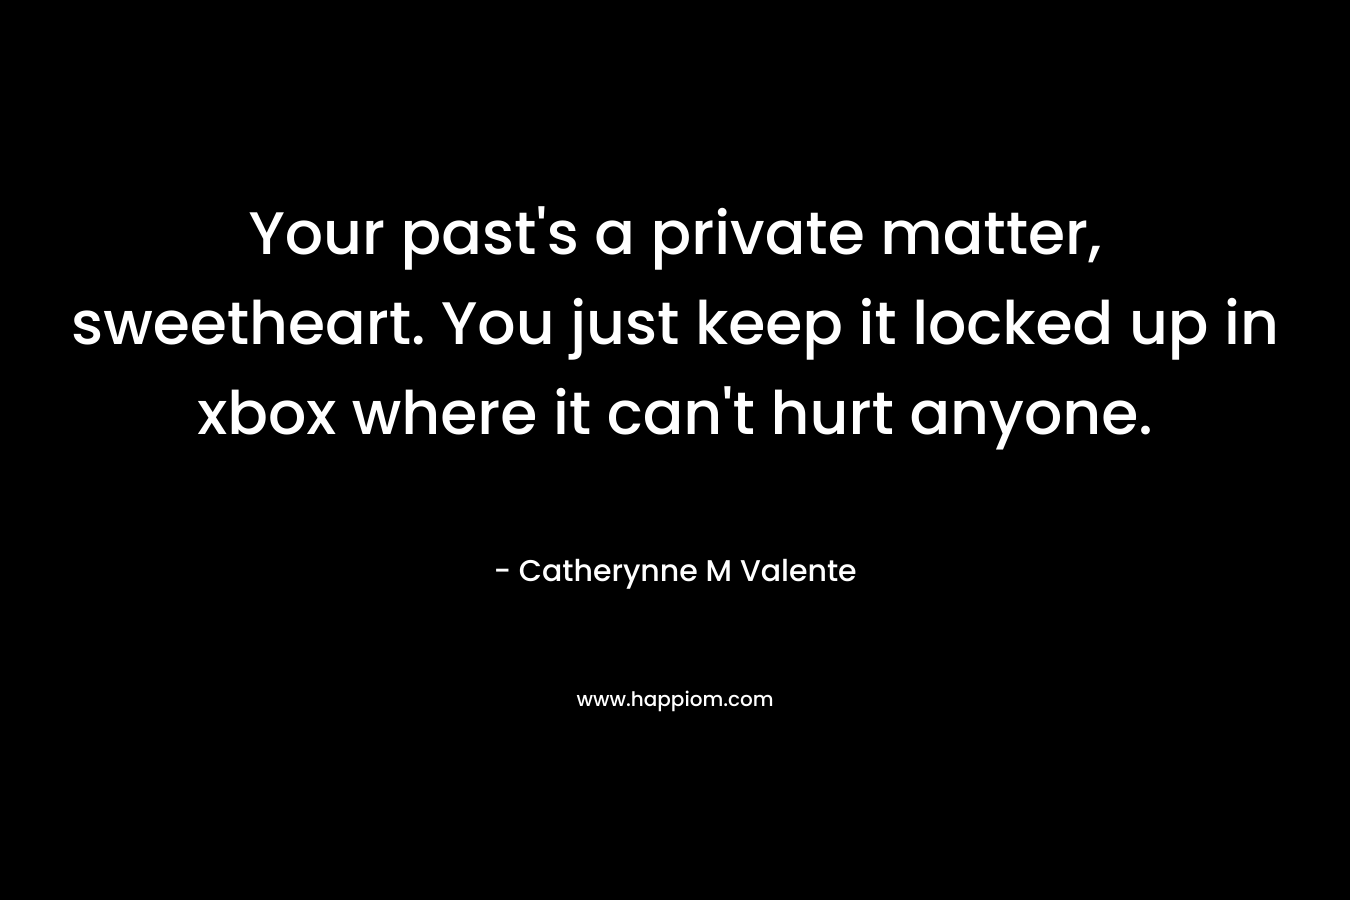 Your past's a private matter, sweetheart. You just keep it locked up in xbox where it can't hurt anyone.